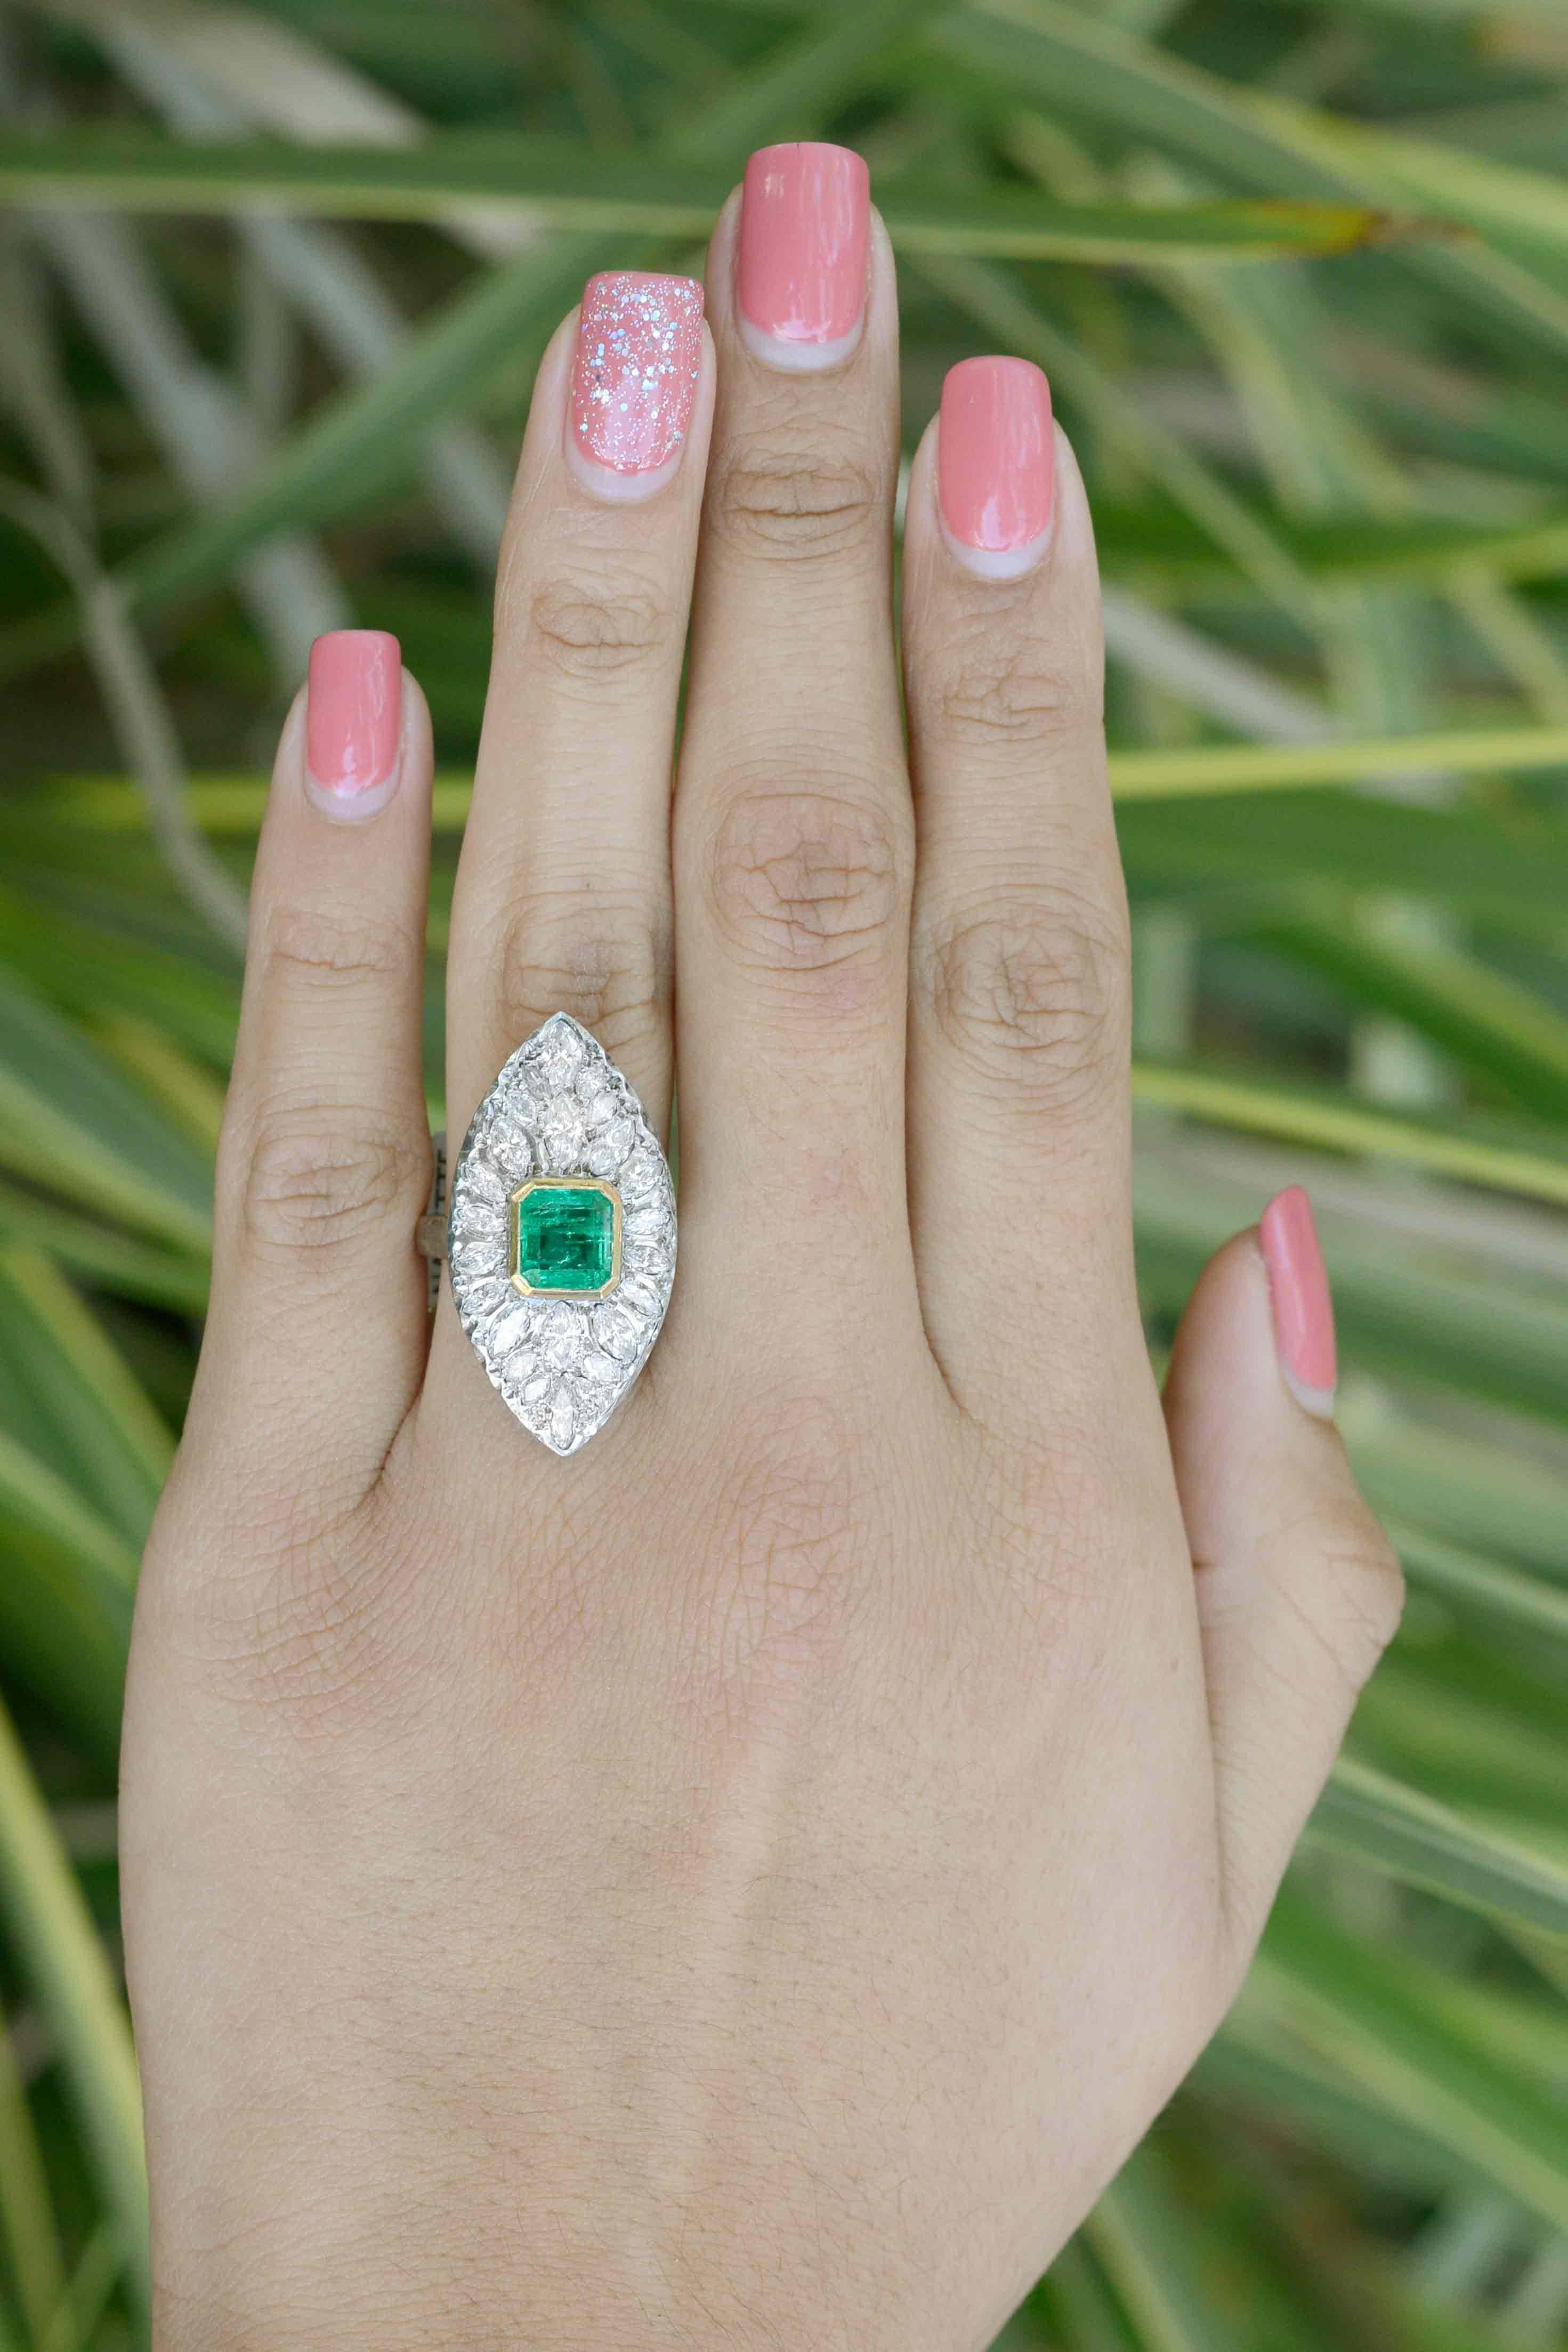 The Danville 2 carat emerald and diamond clocktail ring is a fascinating retro era estate cluster. A lush, vibrant Colombian emerald smartly set in a yellow gold bezel is surrounded by 24 marquis cut diamonds with breathtaking scintillation owing to